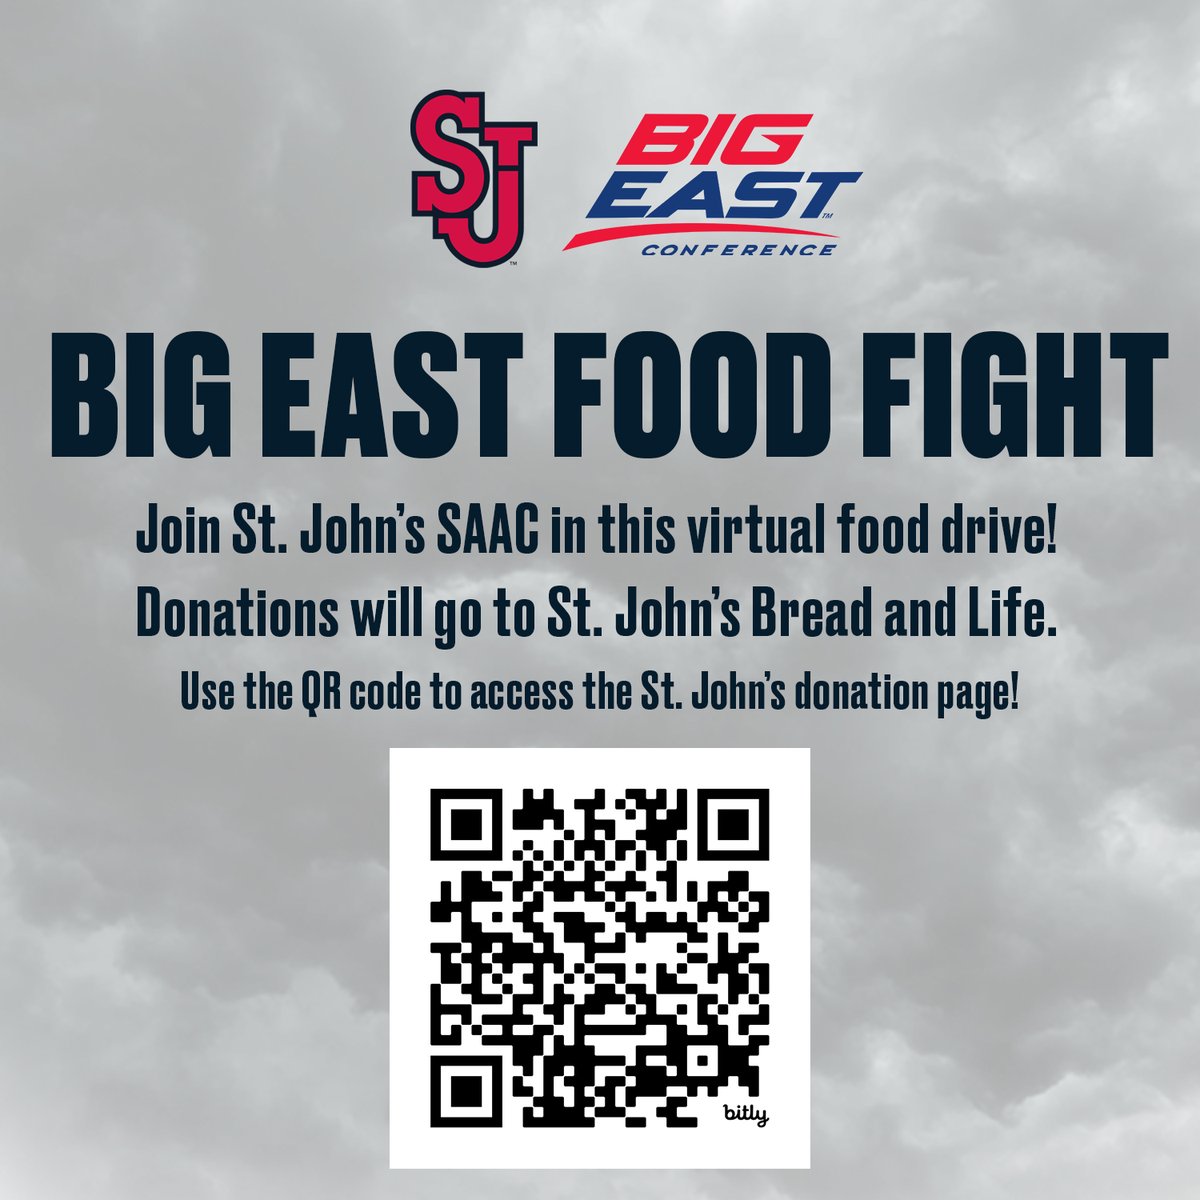 The @BIGEAST Food Fight continues through April 19th! Join St. John’s SAAC as they compete against other BIG EAST schools. All St. John's donations will go to St. John's Bread and Life! Use the QR code or the click the link below ⤵️ yougivegoods.com/drive/view/311…